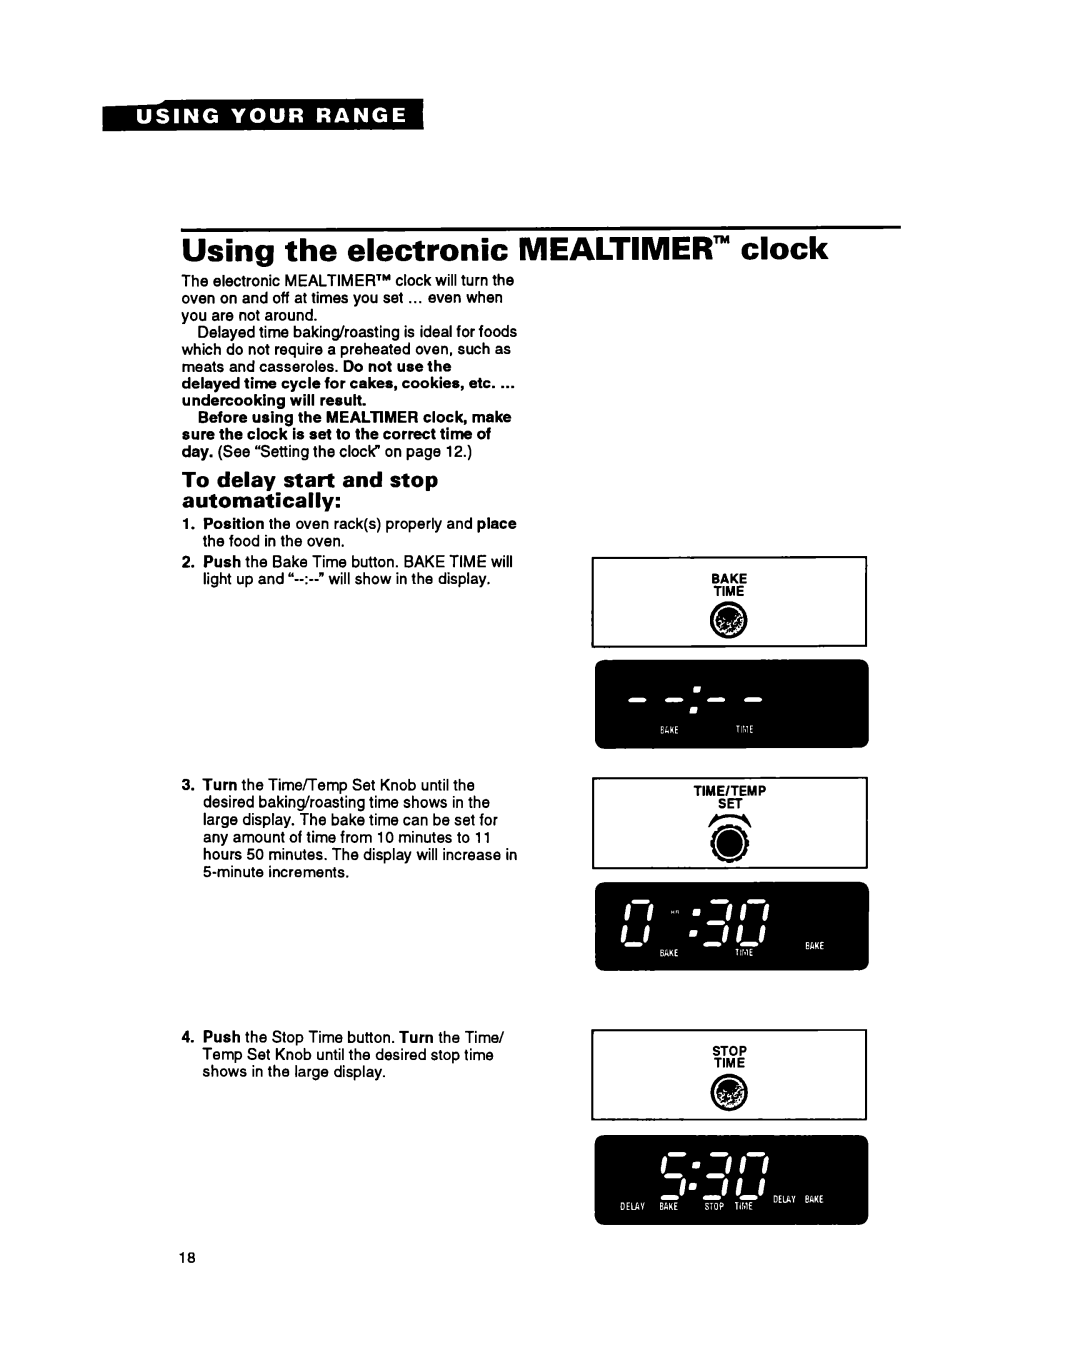 Whirlpool FGS395Y Using the electronic MEALTIMER” clock, To delay start and stop automatically 